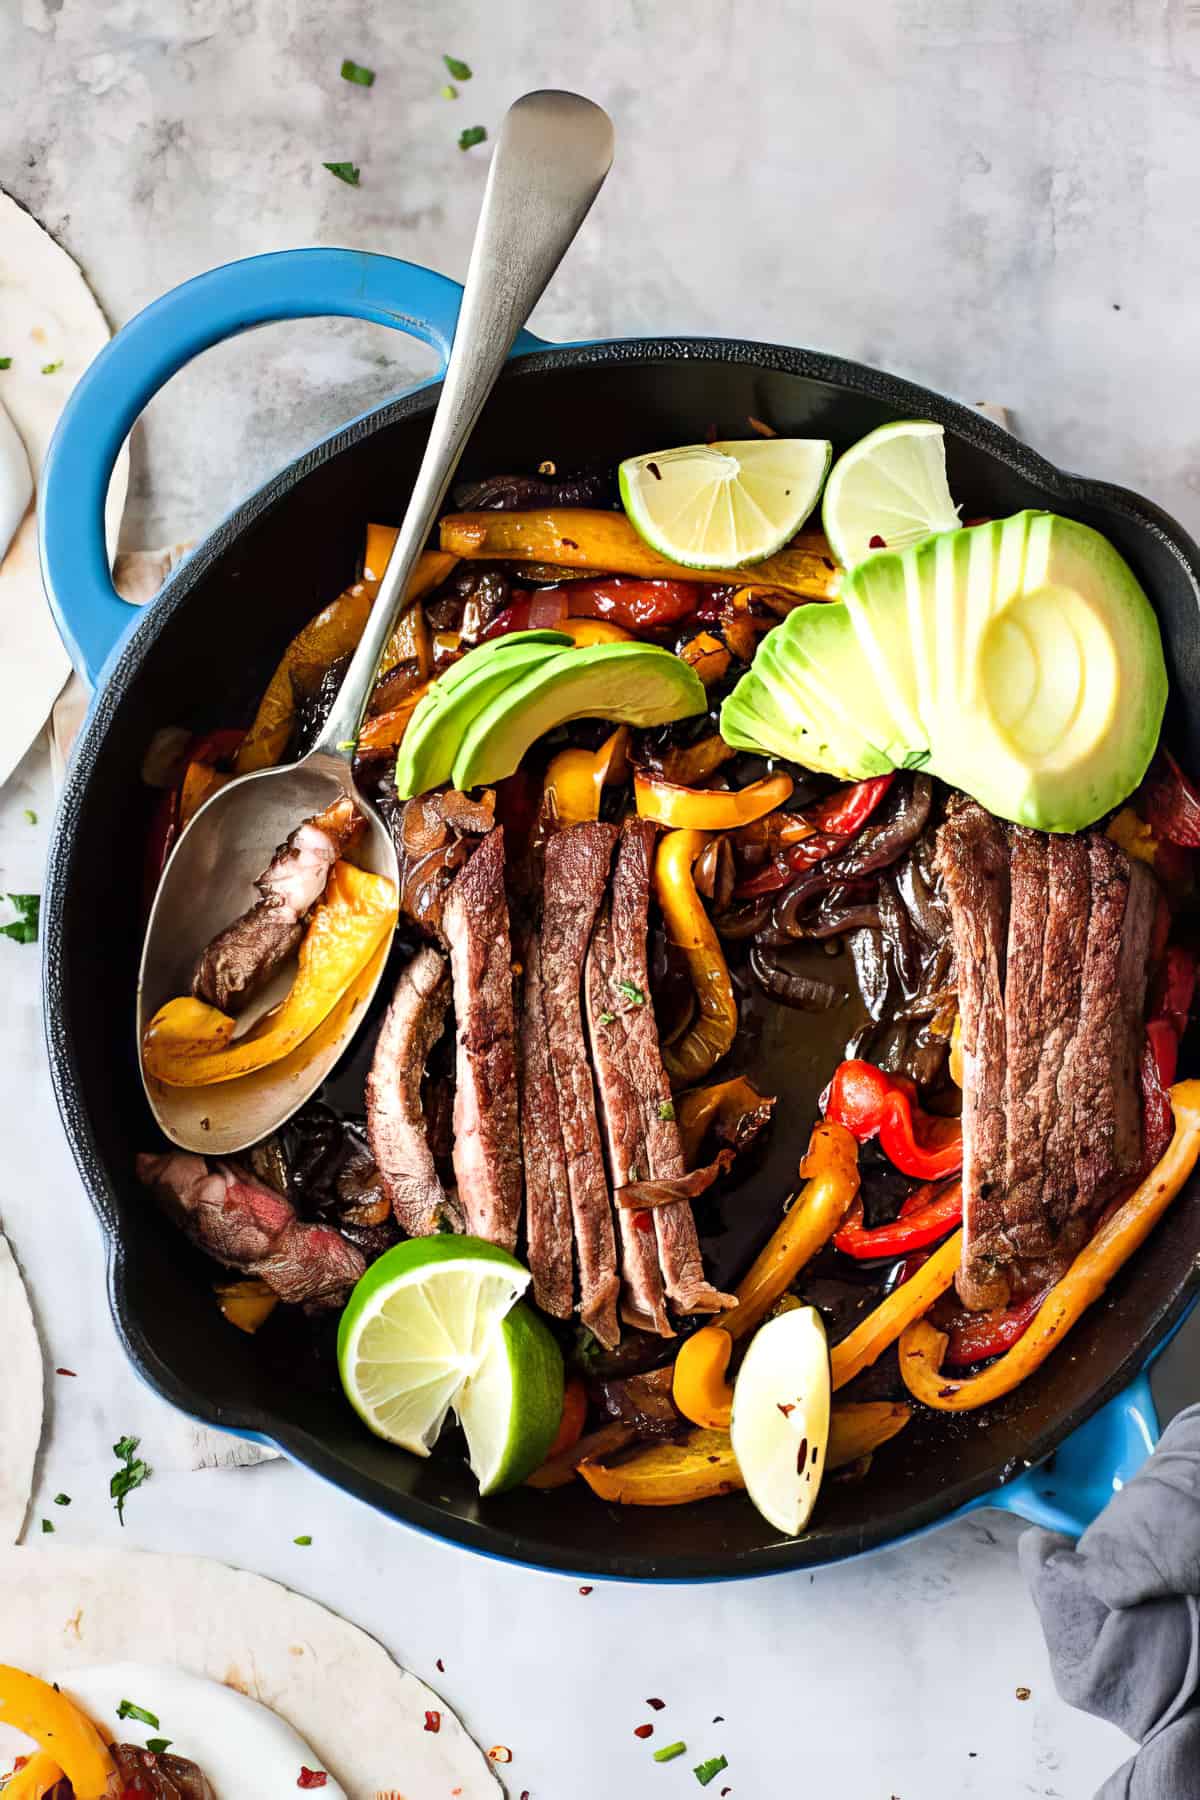 Steak fajitas with peppers and avocado in a skillet.